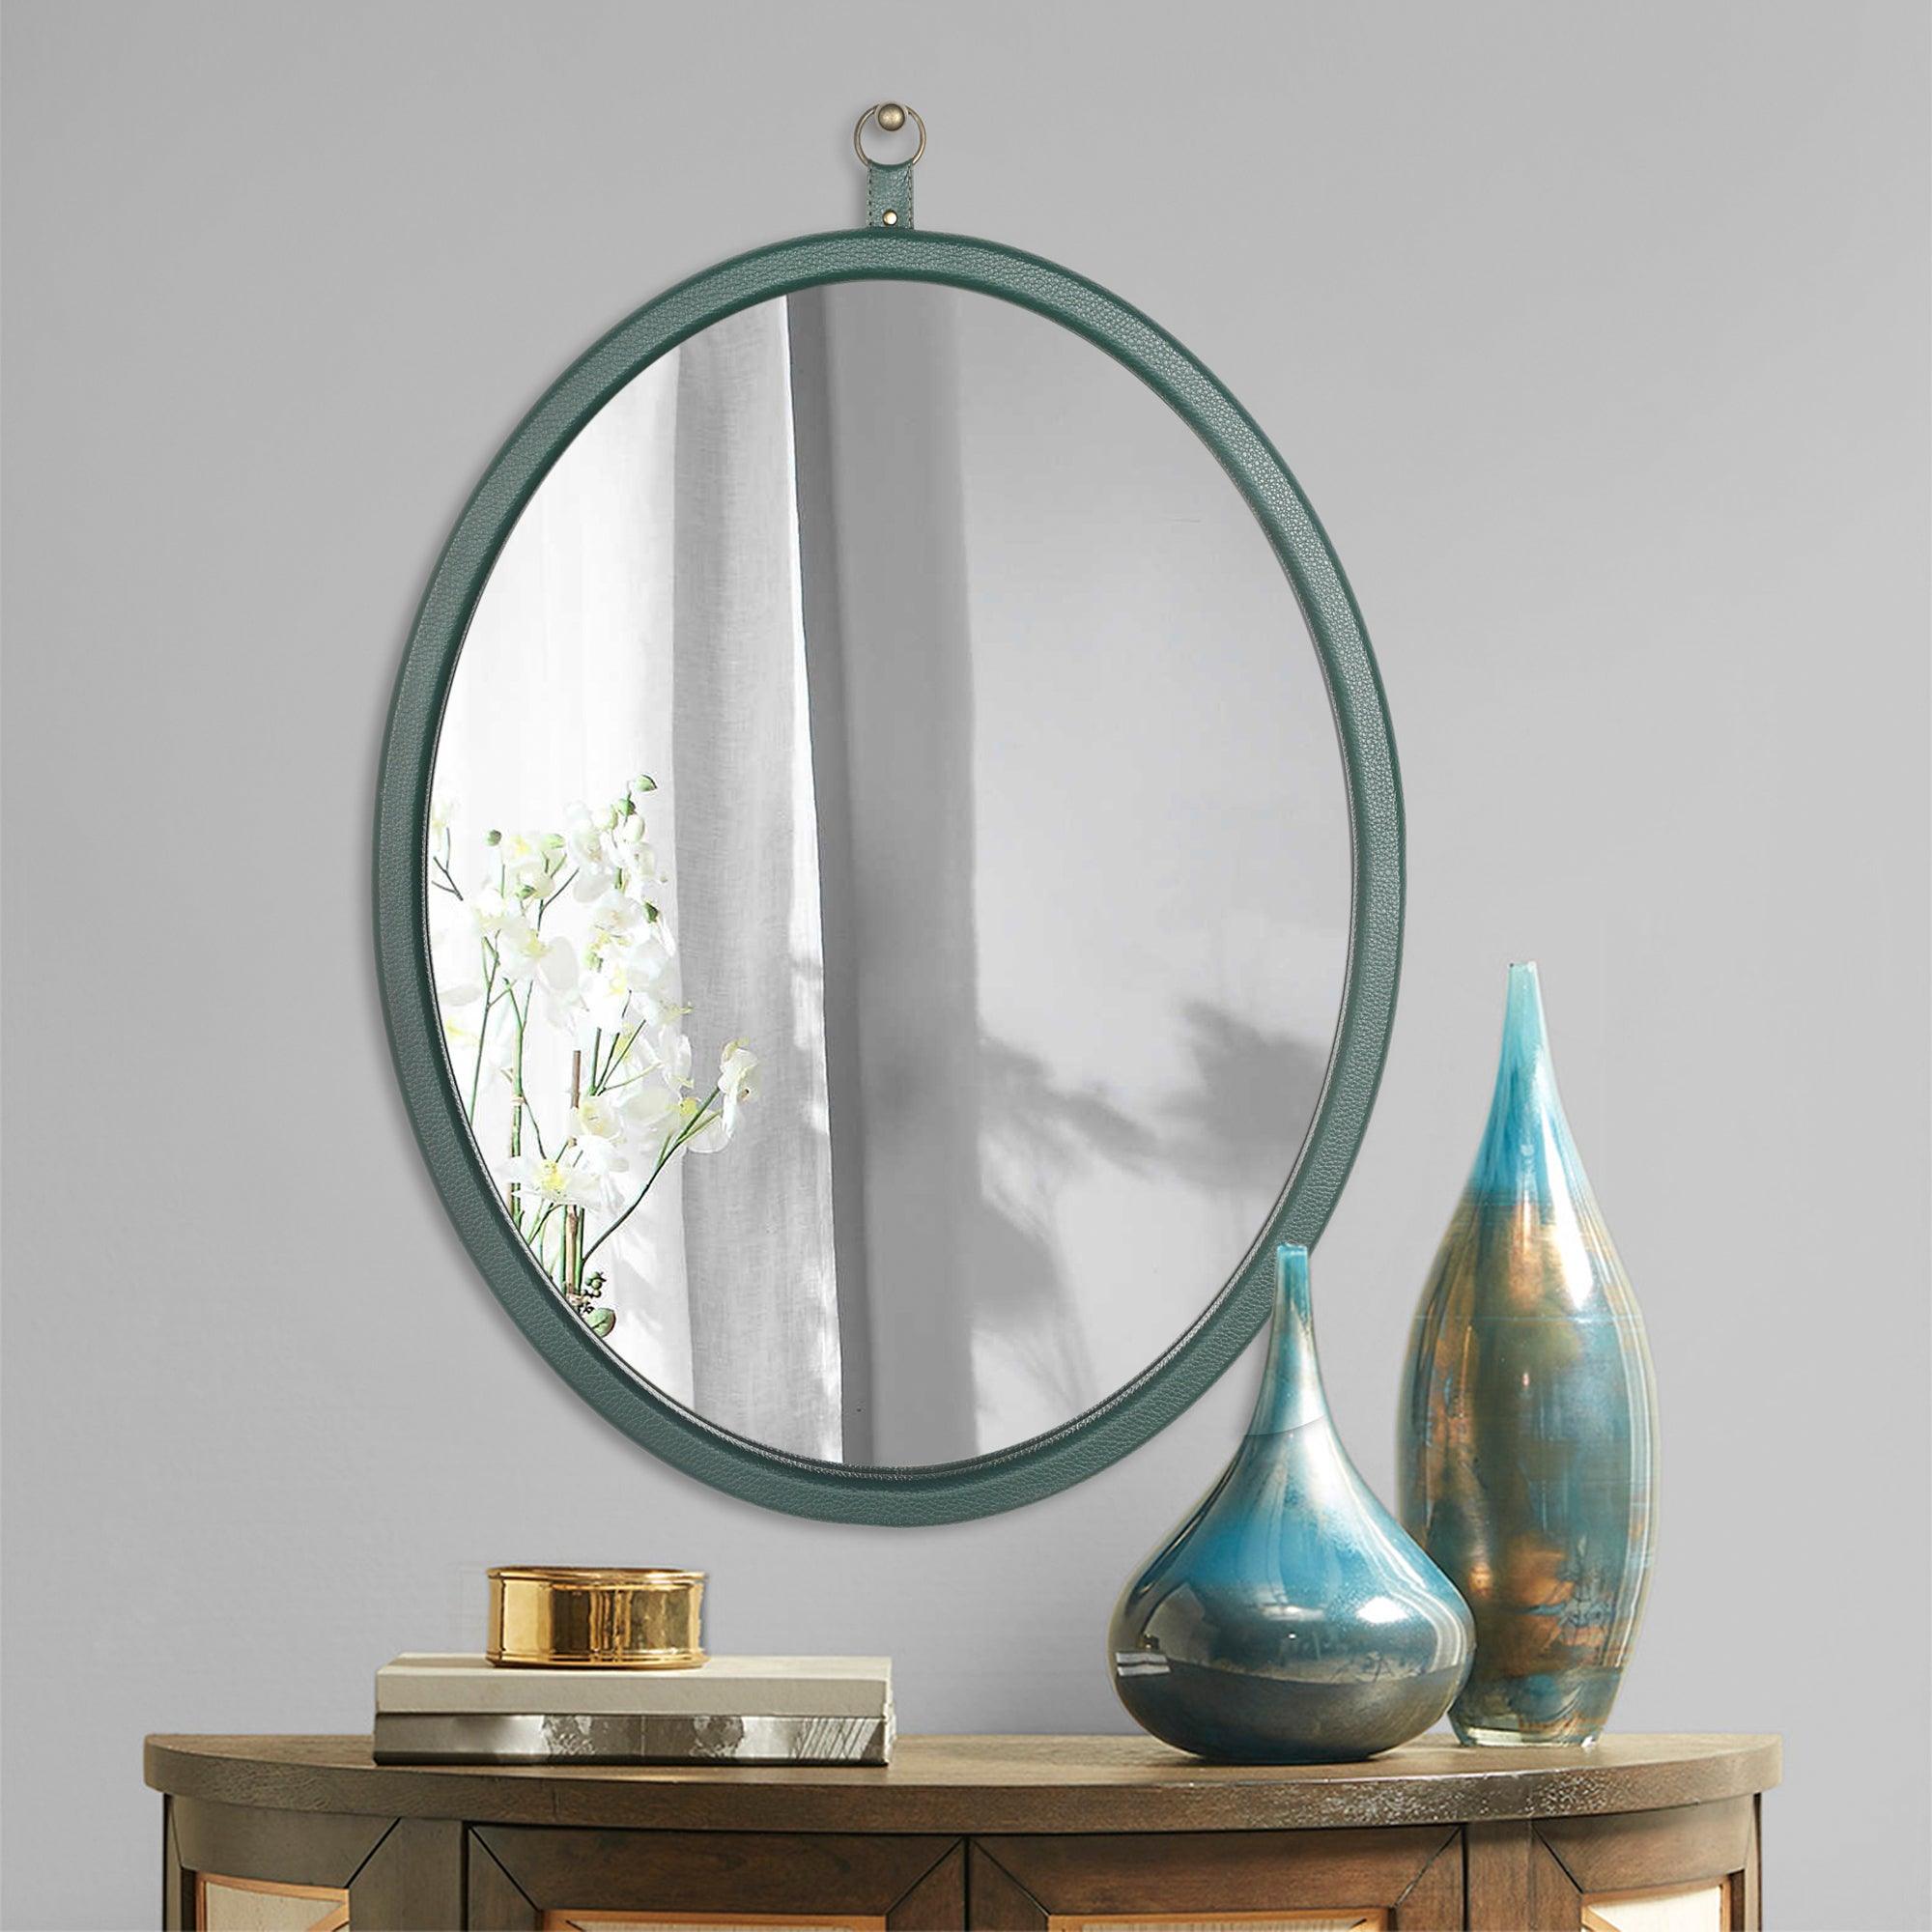 🆓🚛 Oval Green Decorative Wall Hanging Mirror, Pu Covered Mdf Framed Mirror for Bedroom Living Room Vanity Entryway Wall Decor, 23.62X29.92"